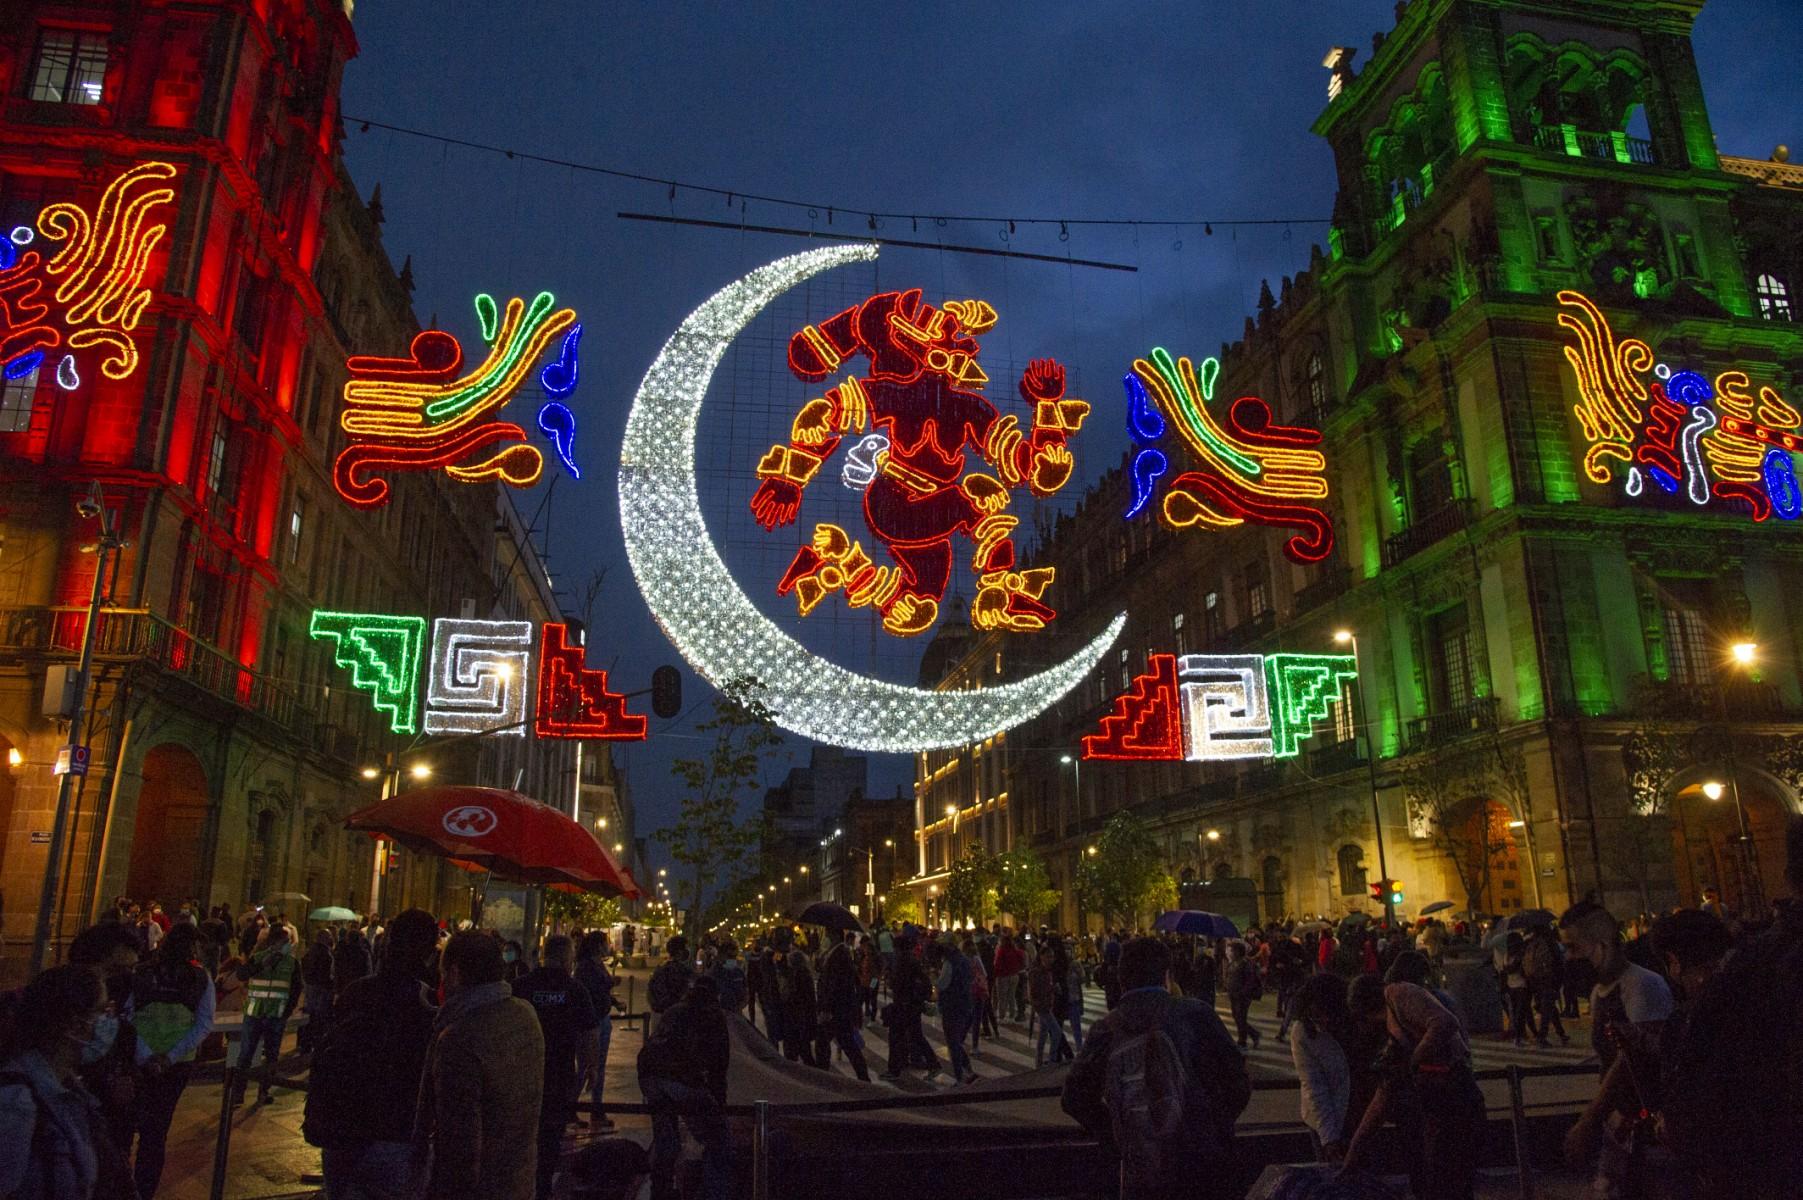 View of the illuminated decorations in Zocalo Square Mexico City on Aug 12, 2021. Mexico has registered 299,805 confirmed deaths from Covid-19, a figure that is likely significantly below the real toll, officials say. Photo: AFP